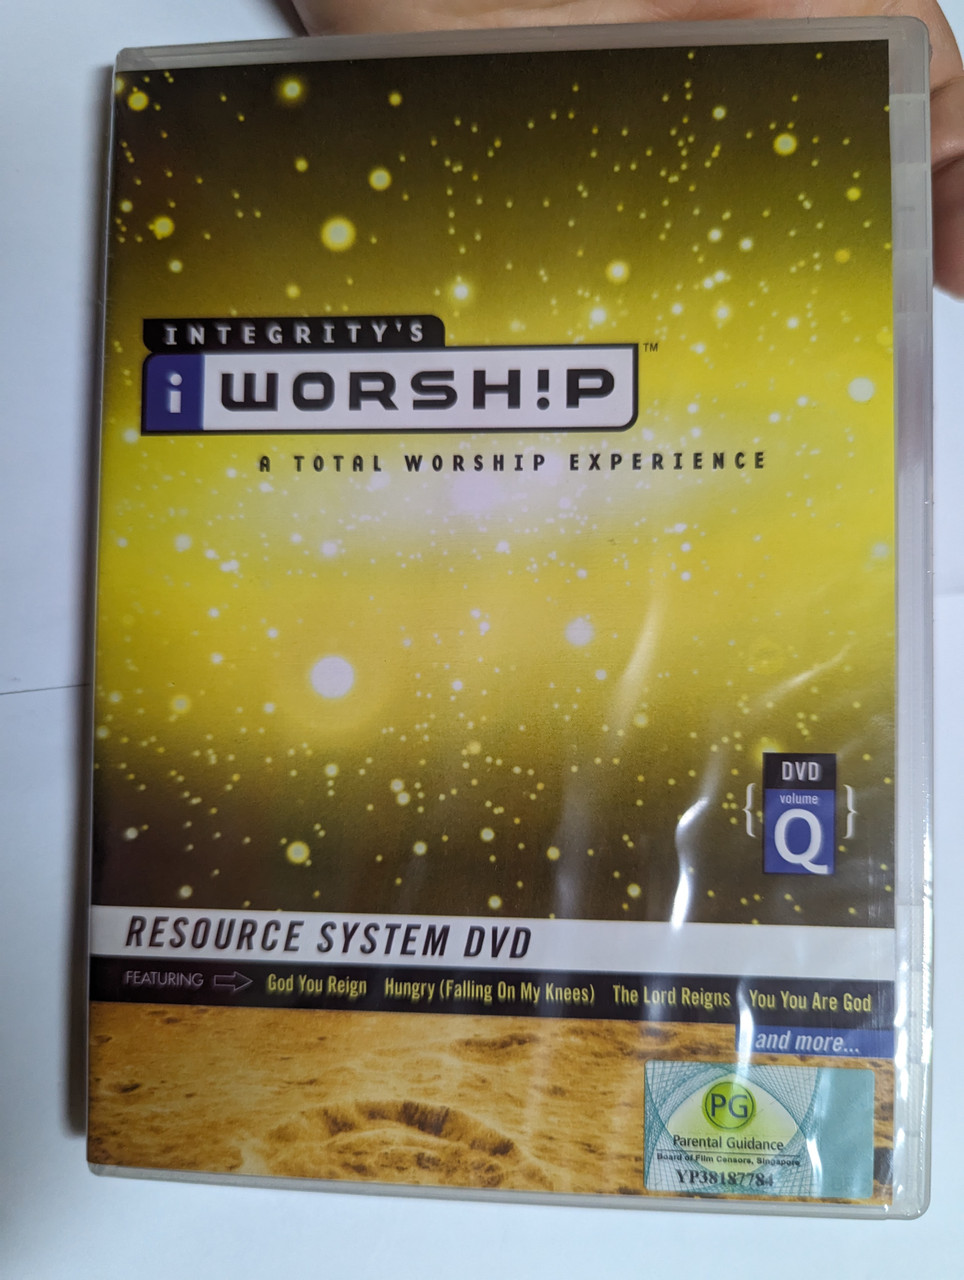 INTEGRITYS_iWORSHIP_A_TOTAL_WORSHIP_EXPERIENCE_DVD_Volume_Q_POWERFUL_FULL-LENGTH_SONG_MOVIES_DESIGNED_TO_ENHANCE_AND_ENLIVEN_ANY_WORSHIP_SERVICE_DVD_768473918__83565.1697948646.1280.1280.jpg (964×1280)